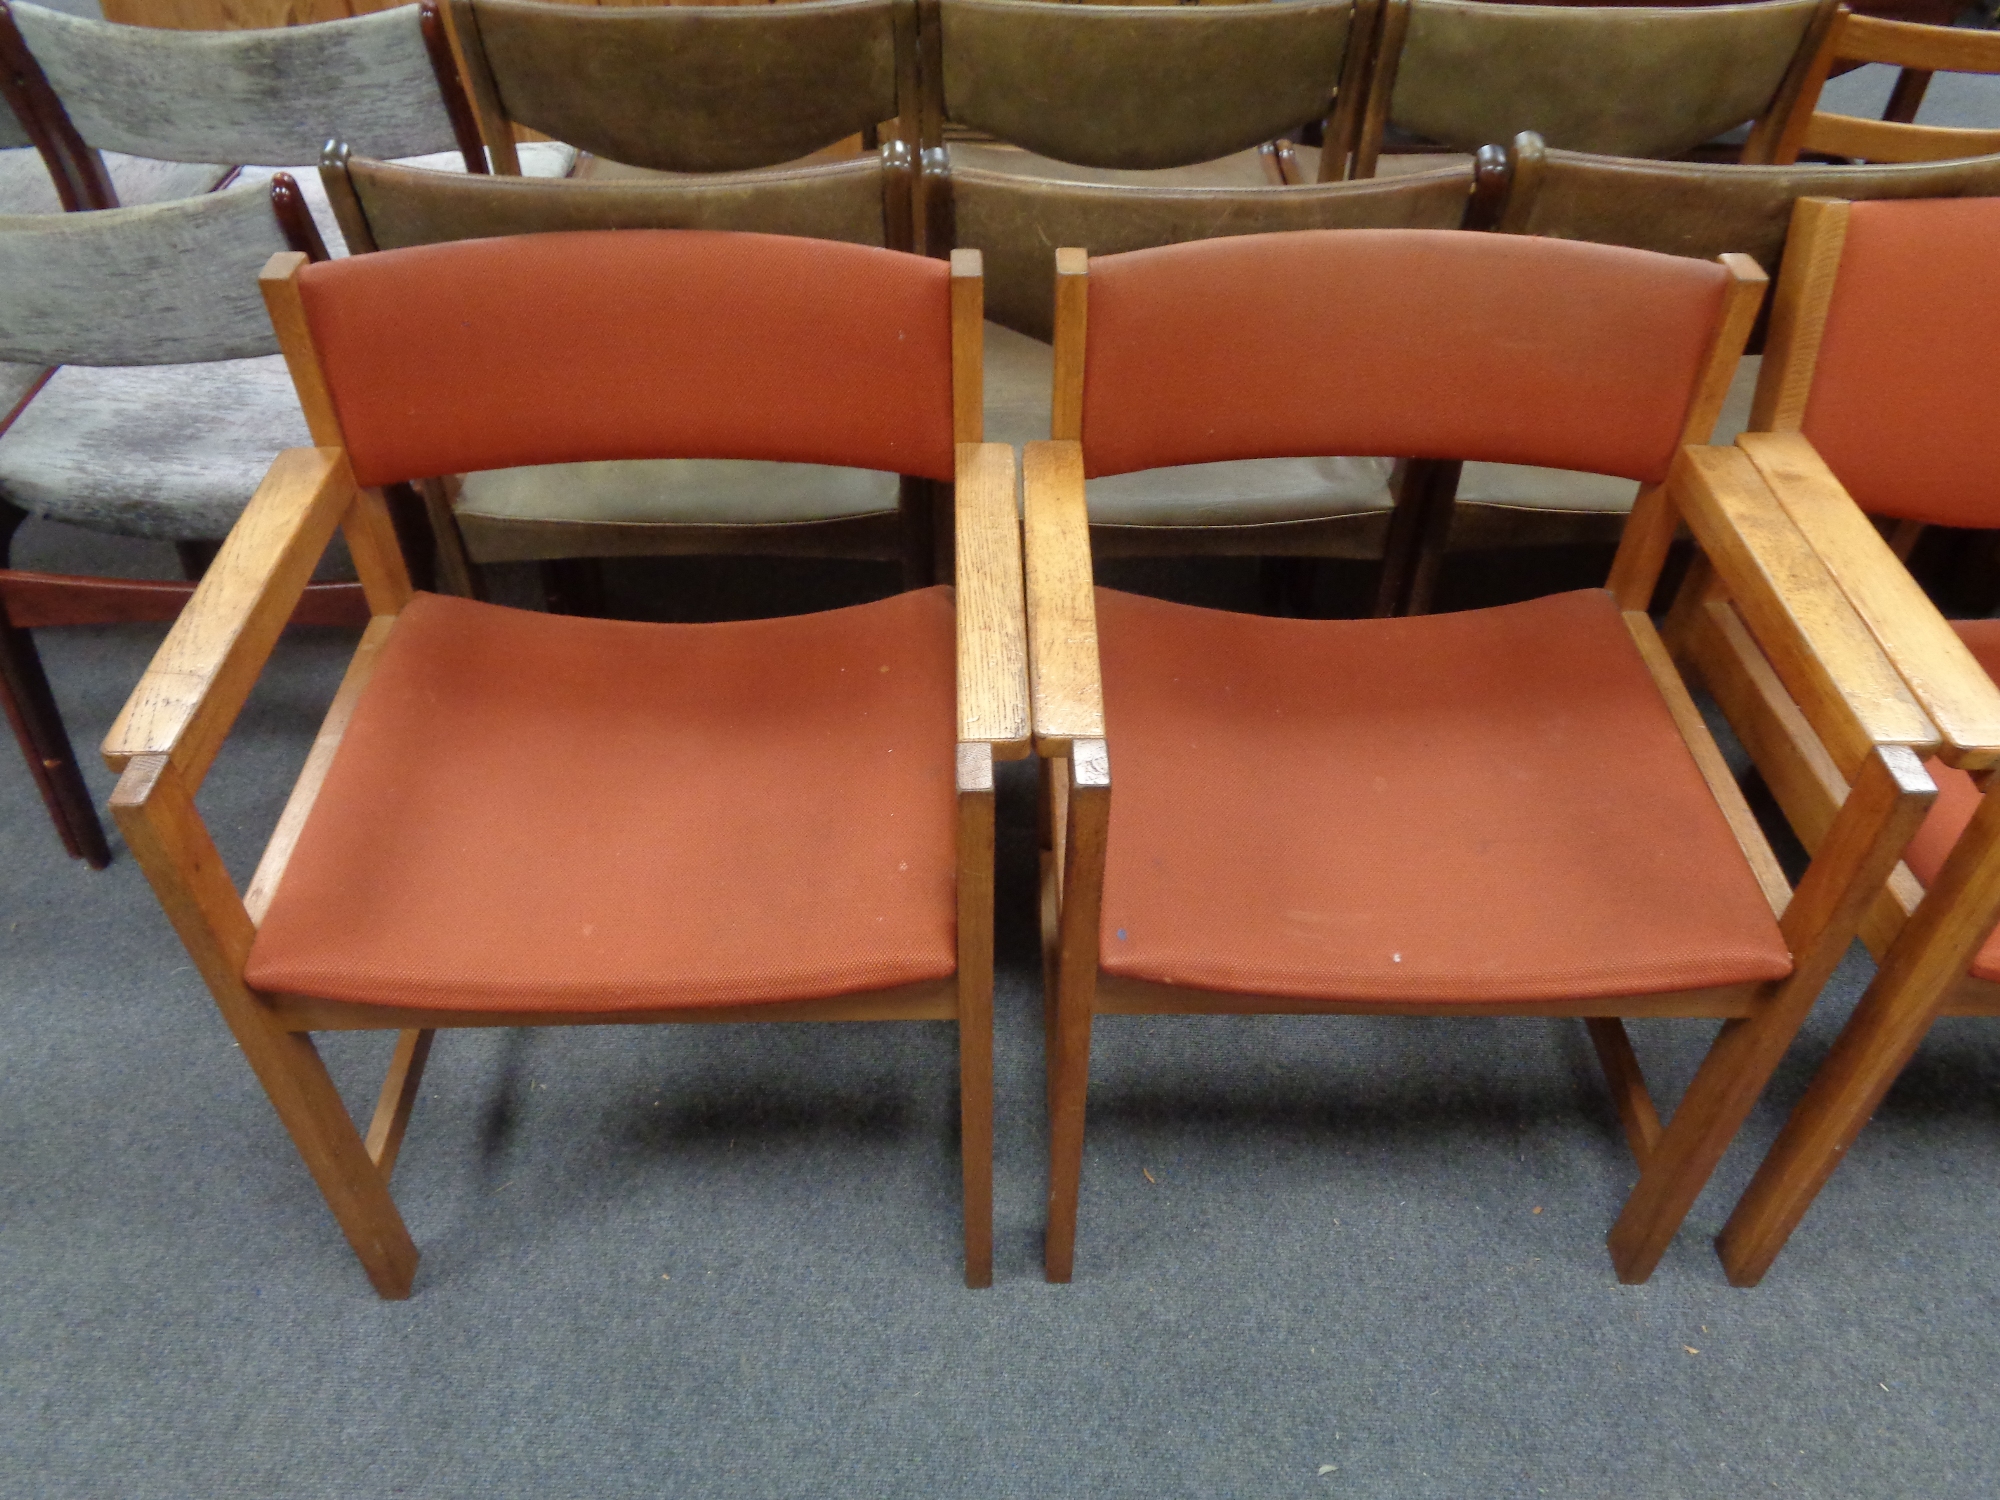 A set of four 20th century Danish armchairs upholstered in a red corded fabric - Image 2 of 2